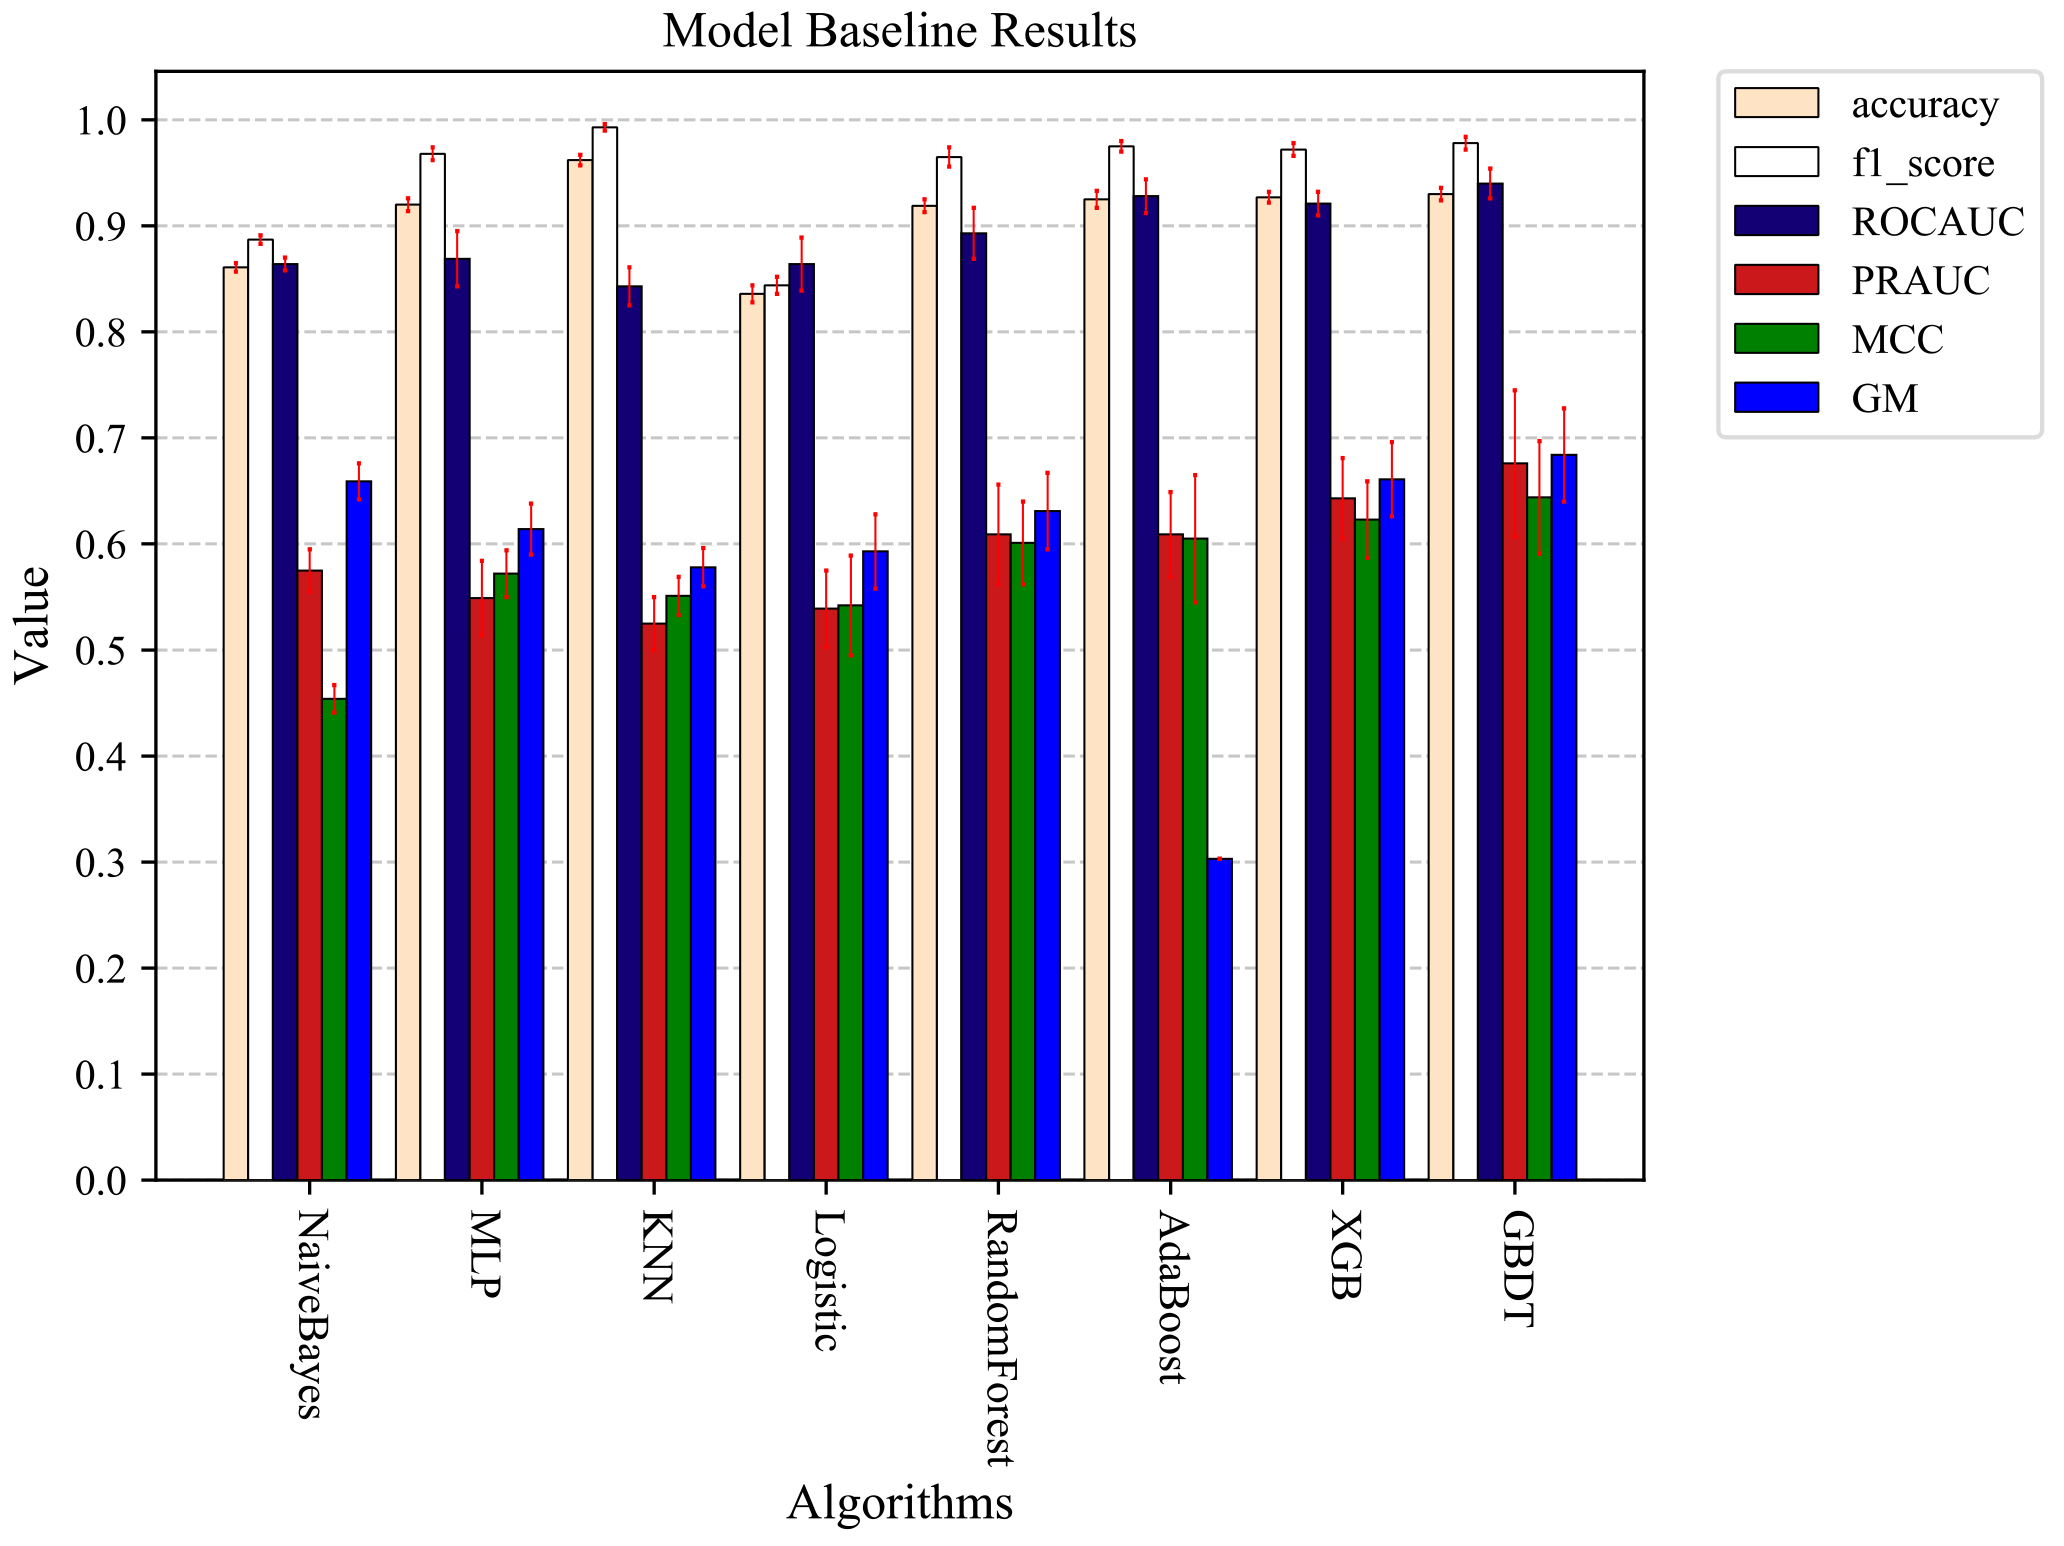 The optimal prediction results were obtained by each machine learning model trained using unsampled data.